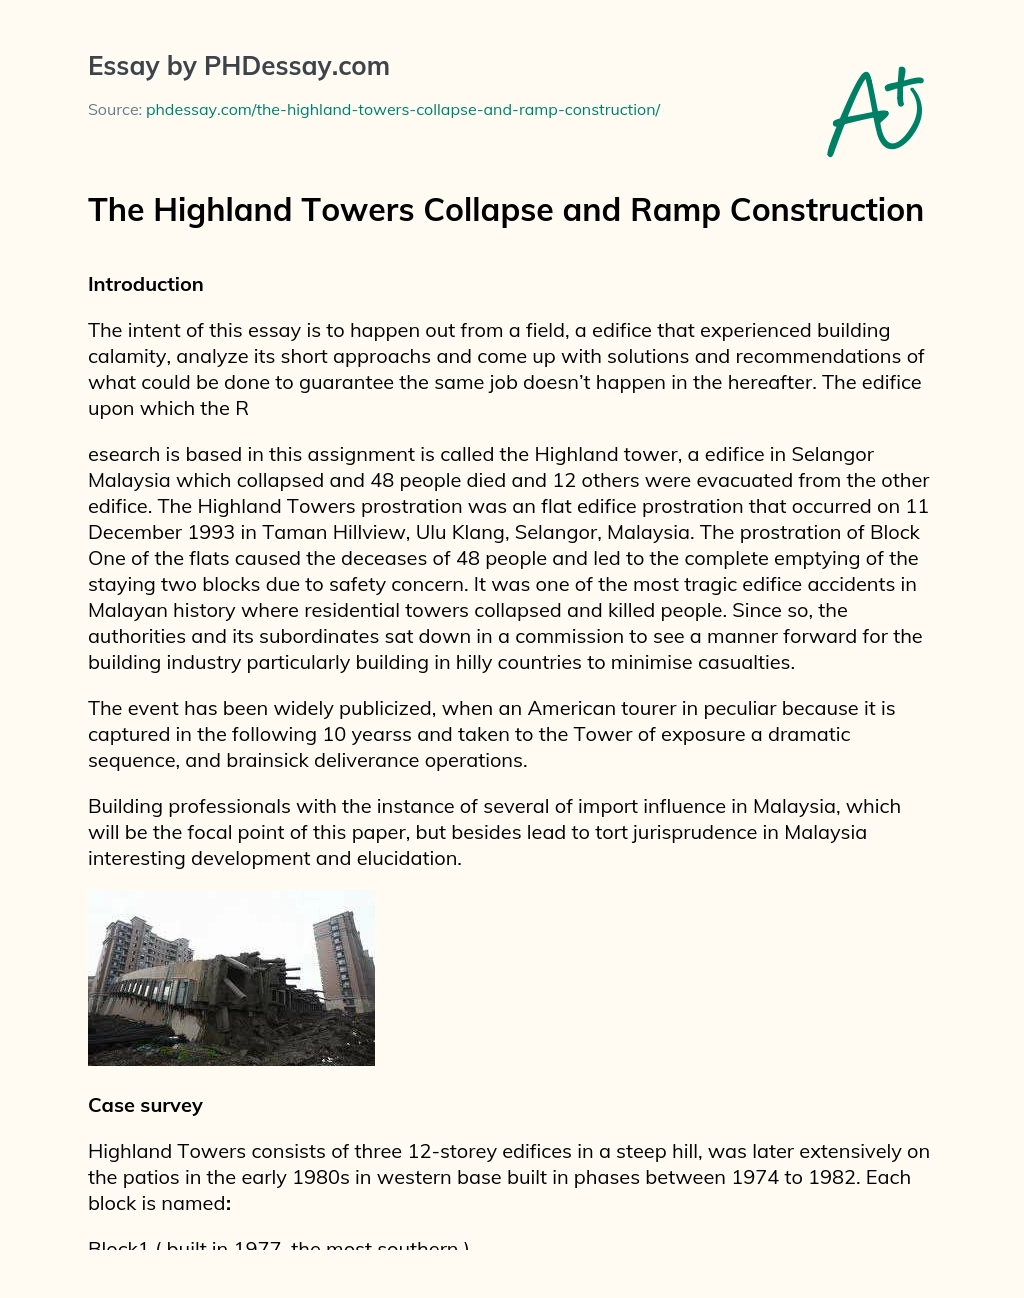 The Highland Towers Collapse and Ramp Construction essay